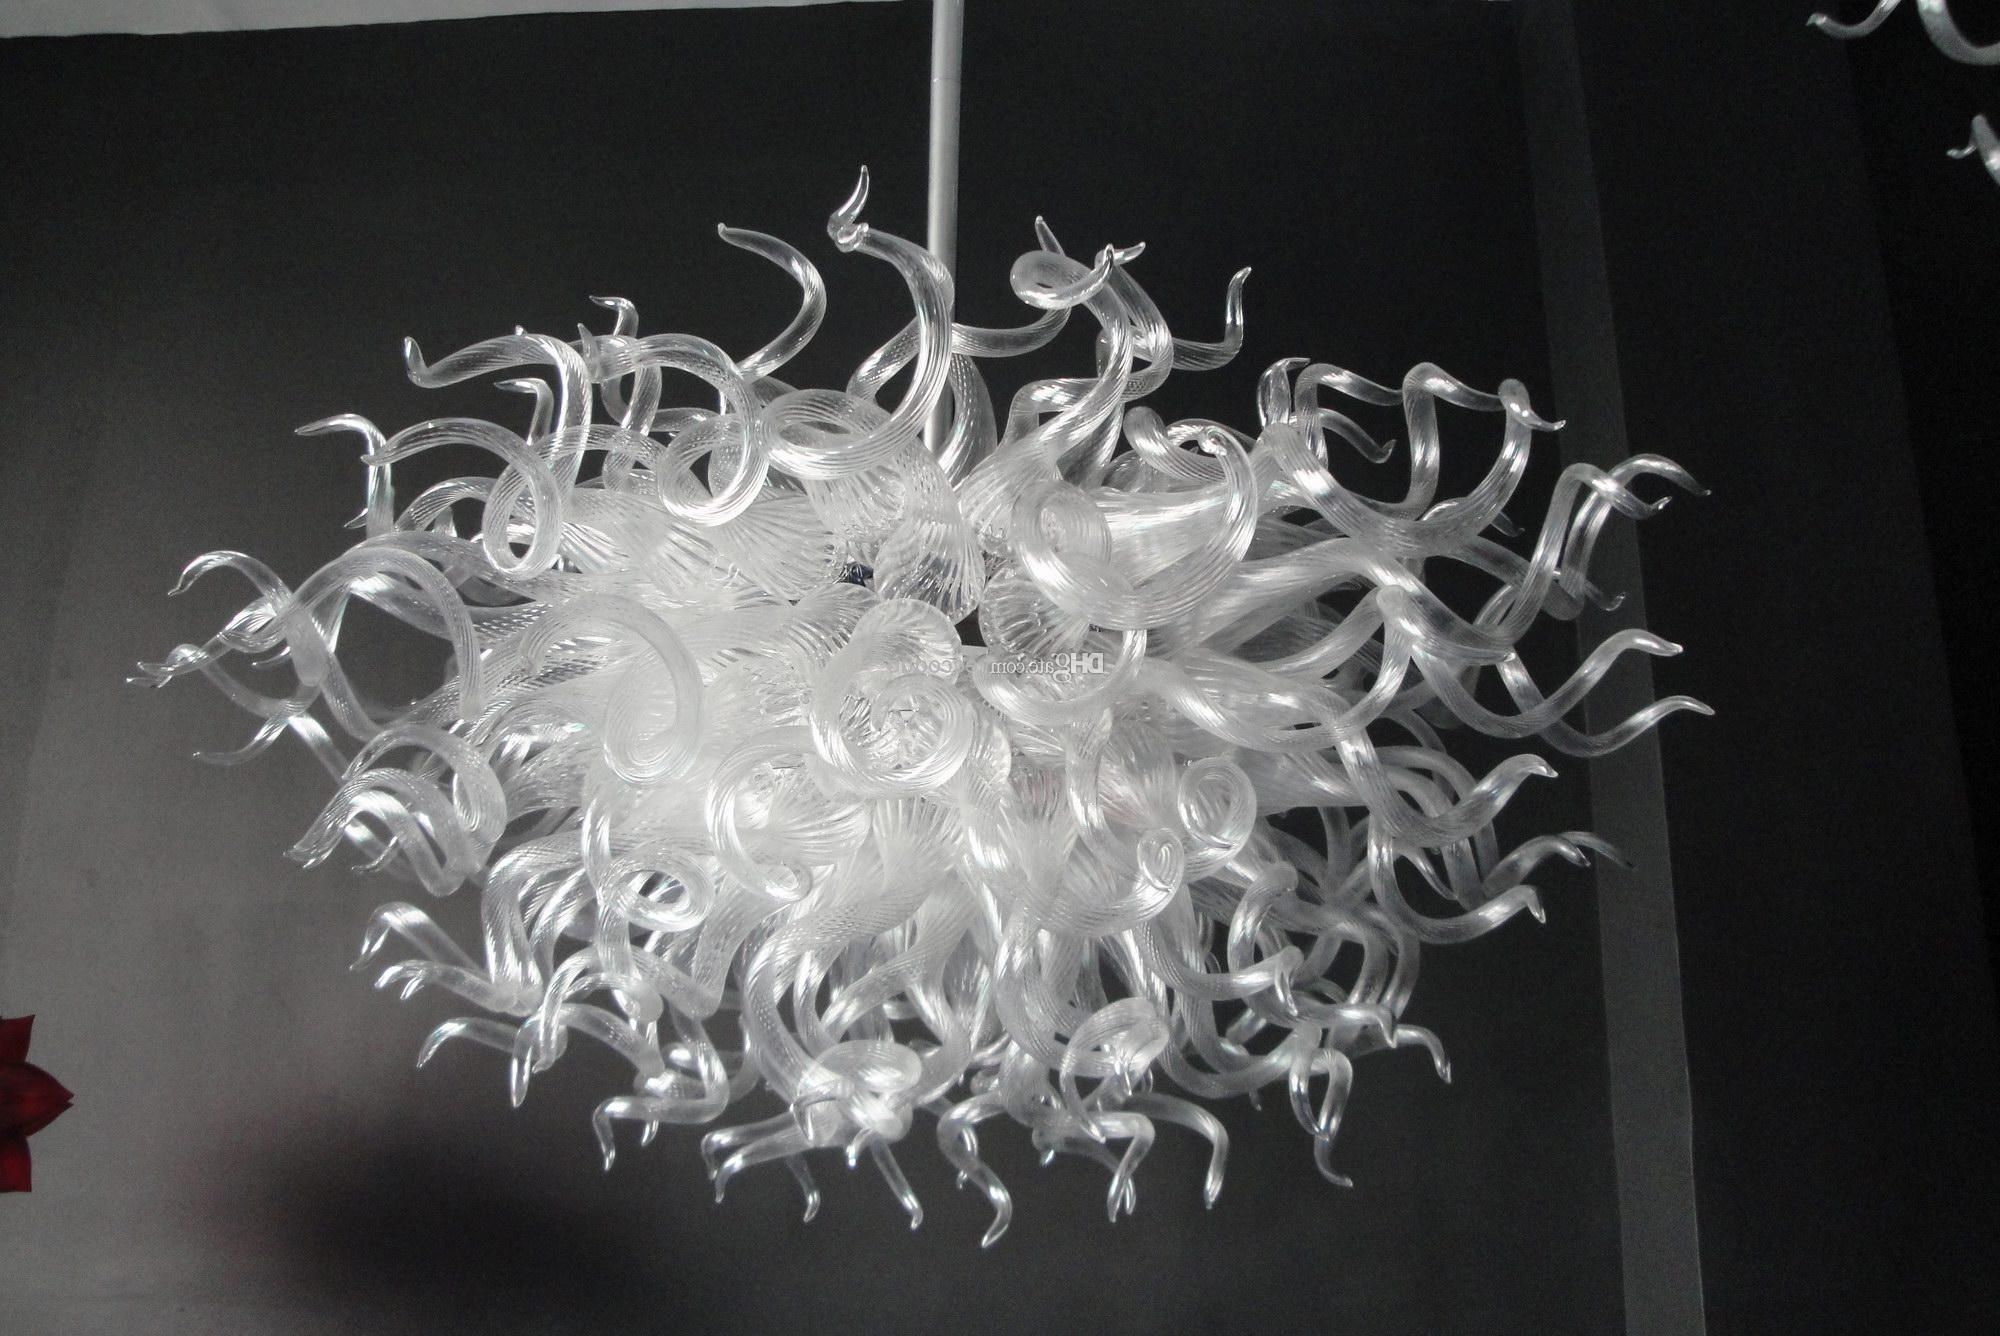 [%2018 100% Hand Blown Artistic Chandelier Lamp Dale Chihuly Murano With Regard To Widely Used White Contemporary Chandelier|white Contemporary Chandelier With Latest 2018 100% Hand Blown Artistic Chandelier Lamp Dale Chihuly Murano|most Popular White Contemporary Chandelier In 2018 100% Hand Blown Artistic Chandelier Lamp Dale Chihuly Murano|fashionable 2018 100% Hand Blown Artistic Chandelier Lamp Dale Chihuly Murano For White Contemporary Chandelier%] (View 2 of 20)